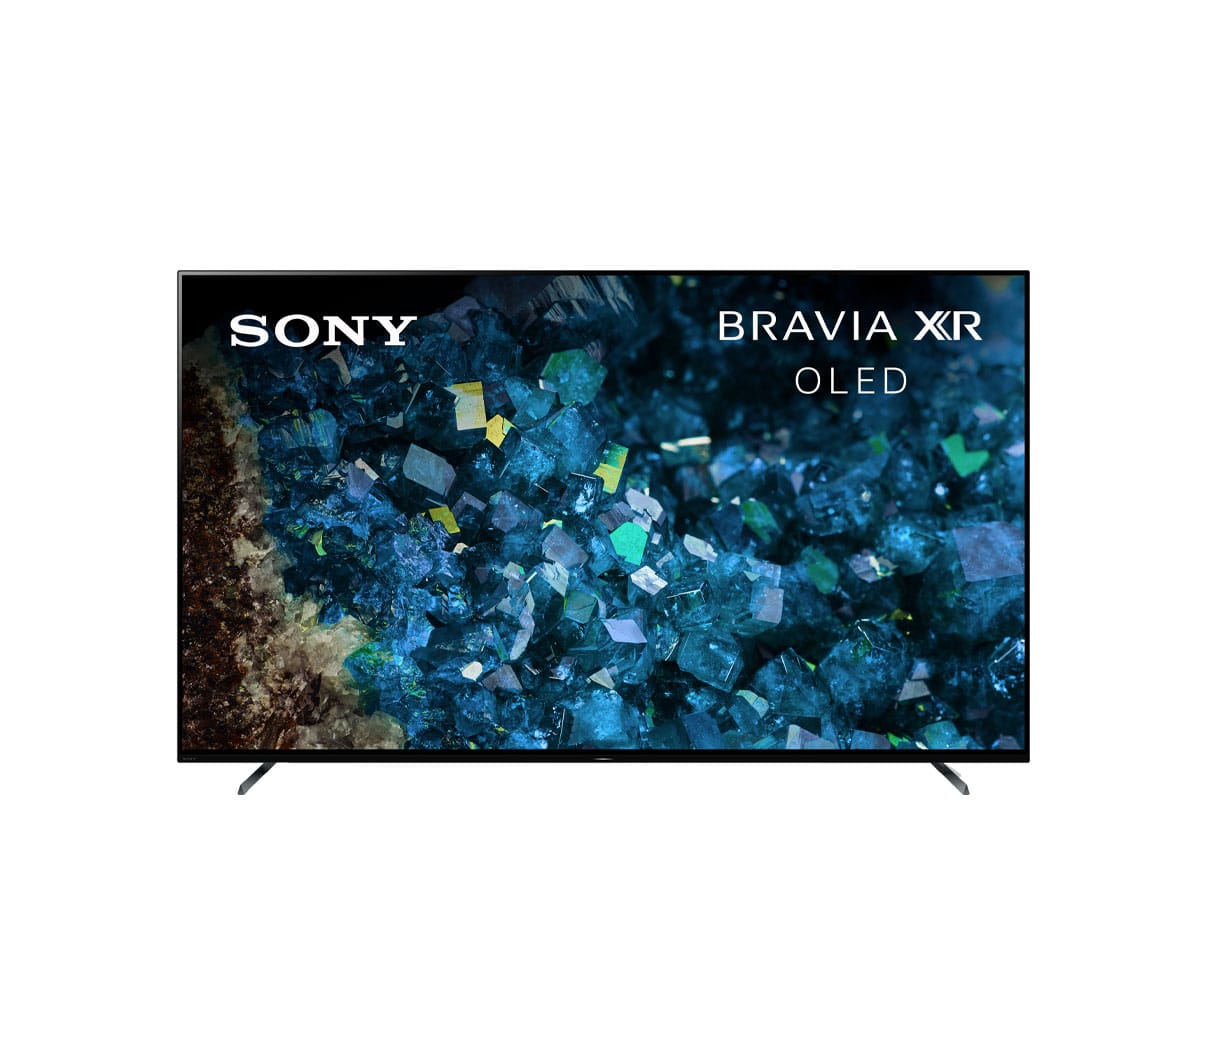 Sony XRA80L Series 4K ULTRA HD OLED TV with XR Cognitive Processing